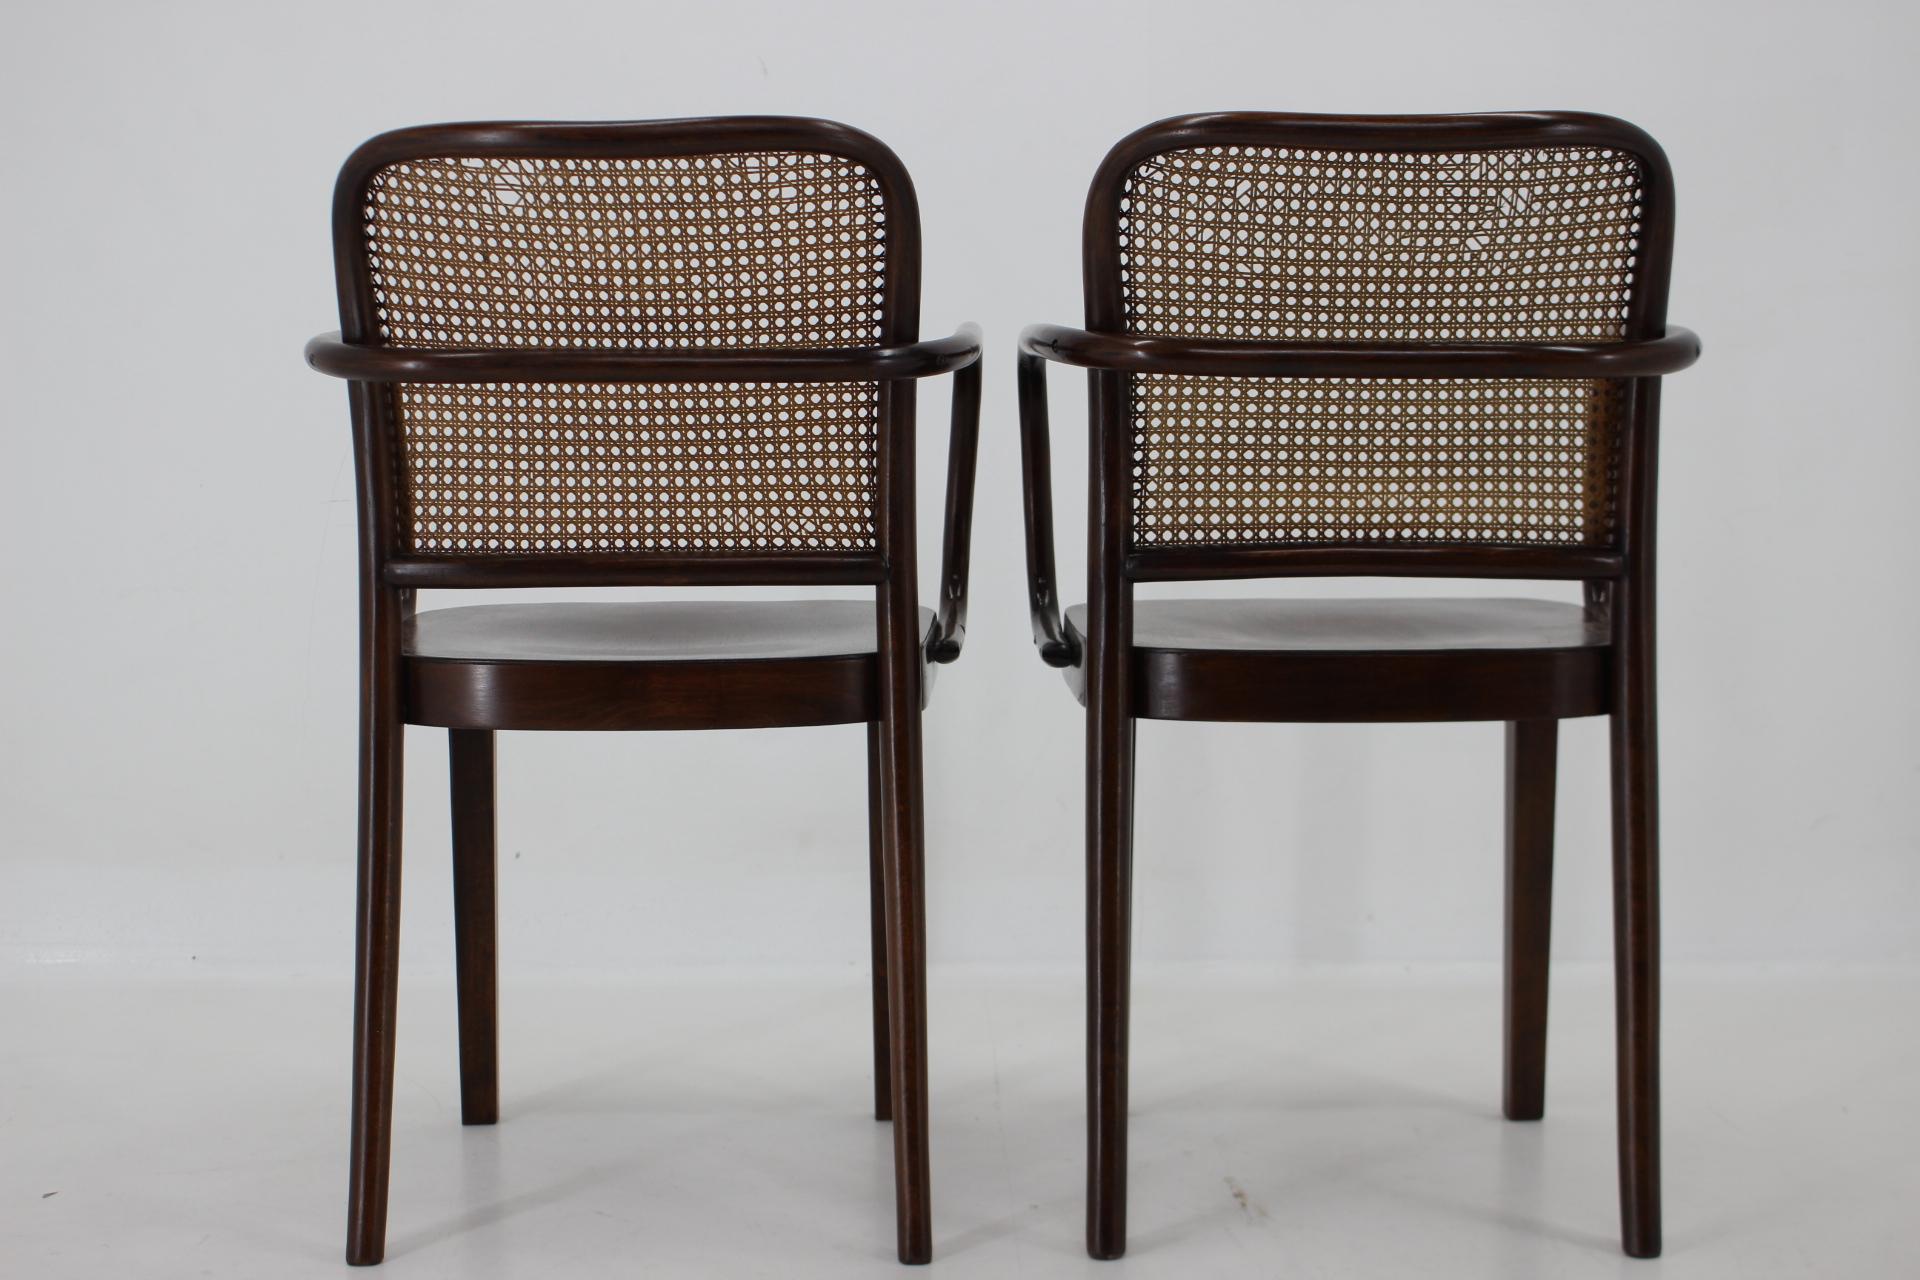 1920s Josef Hoffmann Bentwood Chairs, No. 811 for Thonet, Czechoslovakia For Sale 2